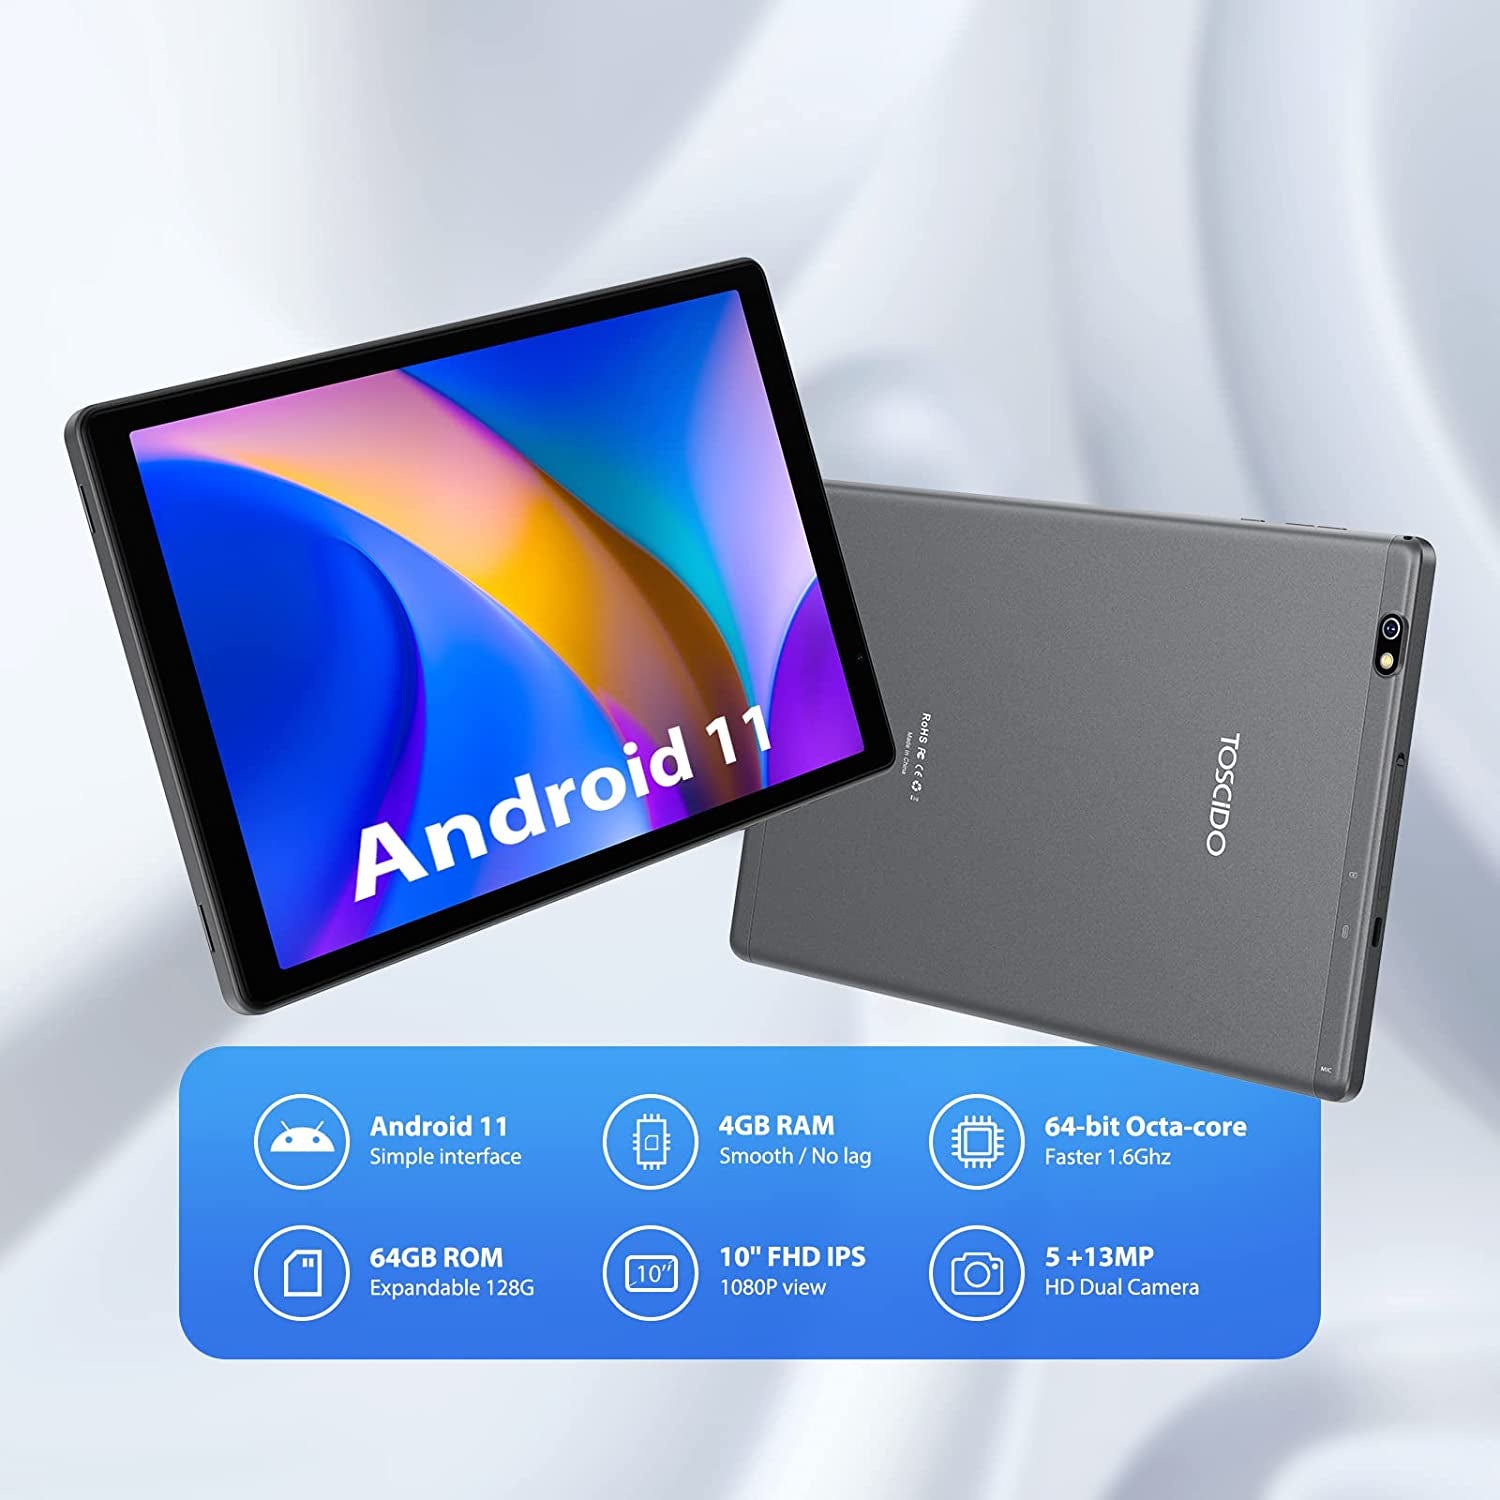 Tablet 10 Inch Octa Core Android 11,4GB RAM,64GB ROM - Silver - Everyday-Sales.com